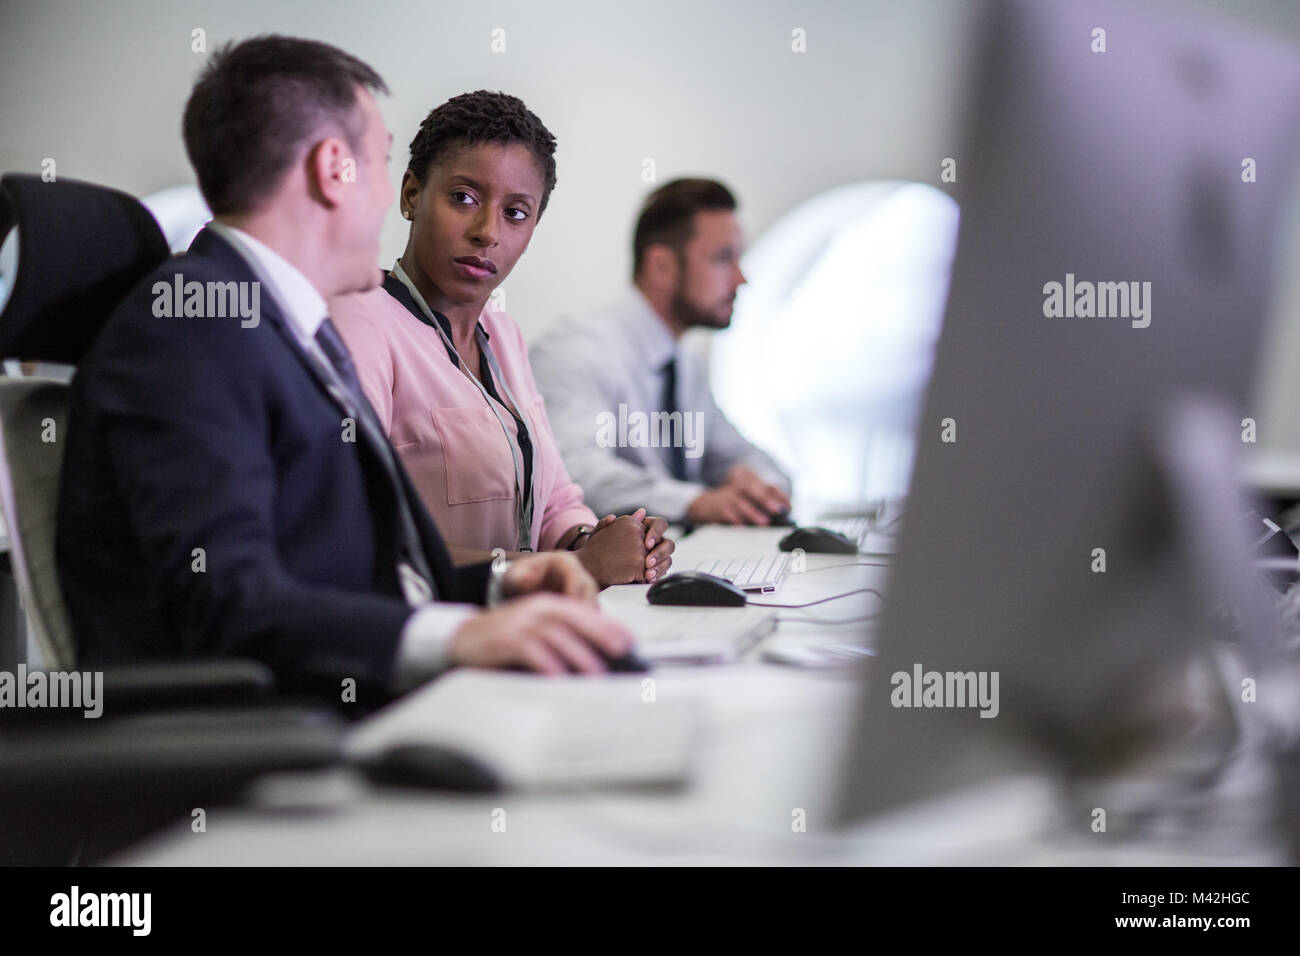 Colleagues in an office talking together Stock Photo